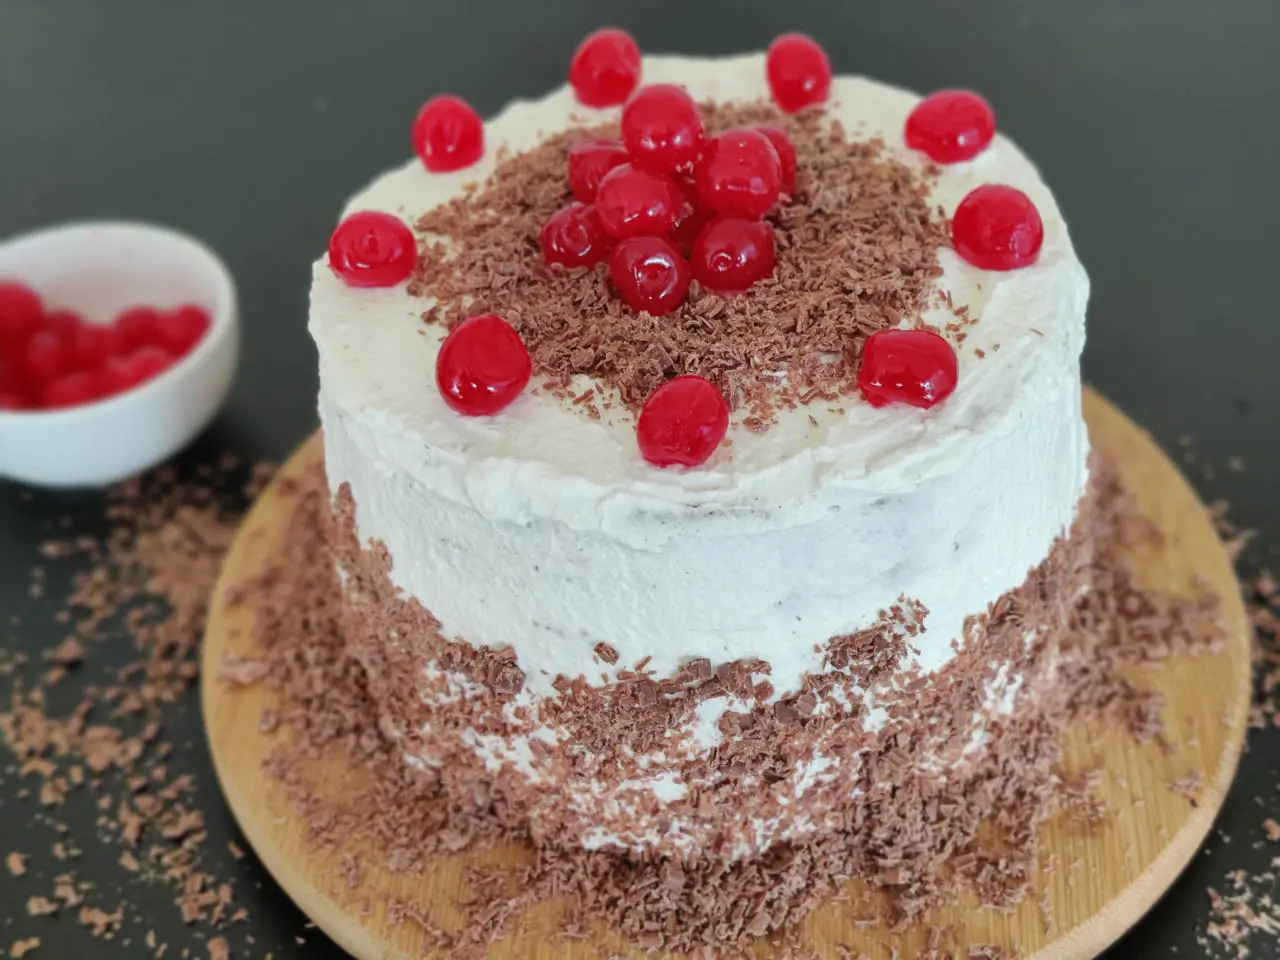 How To Make An Easy Eggless Black Forest Cake - Sugar Spice